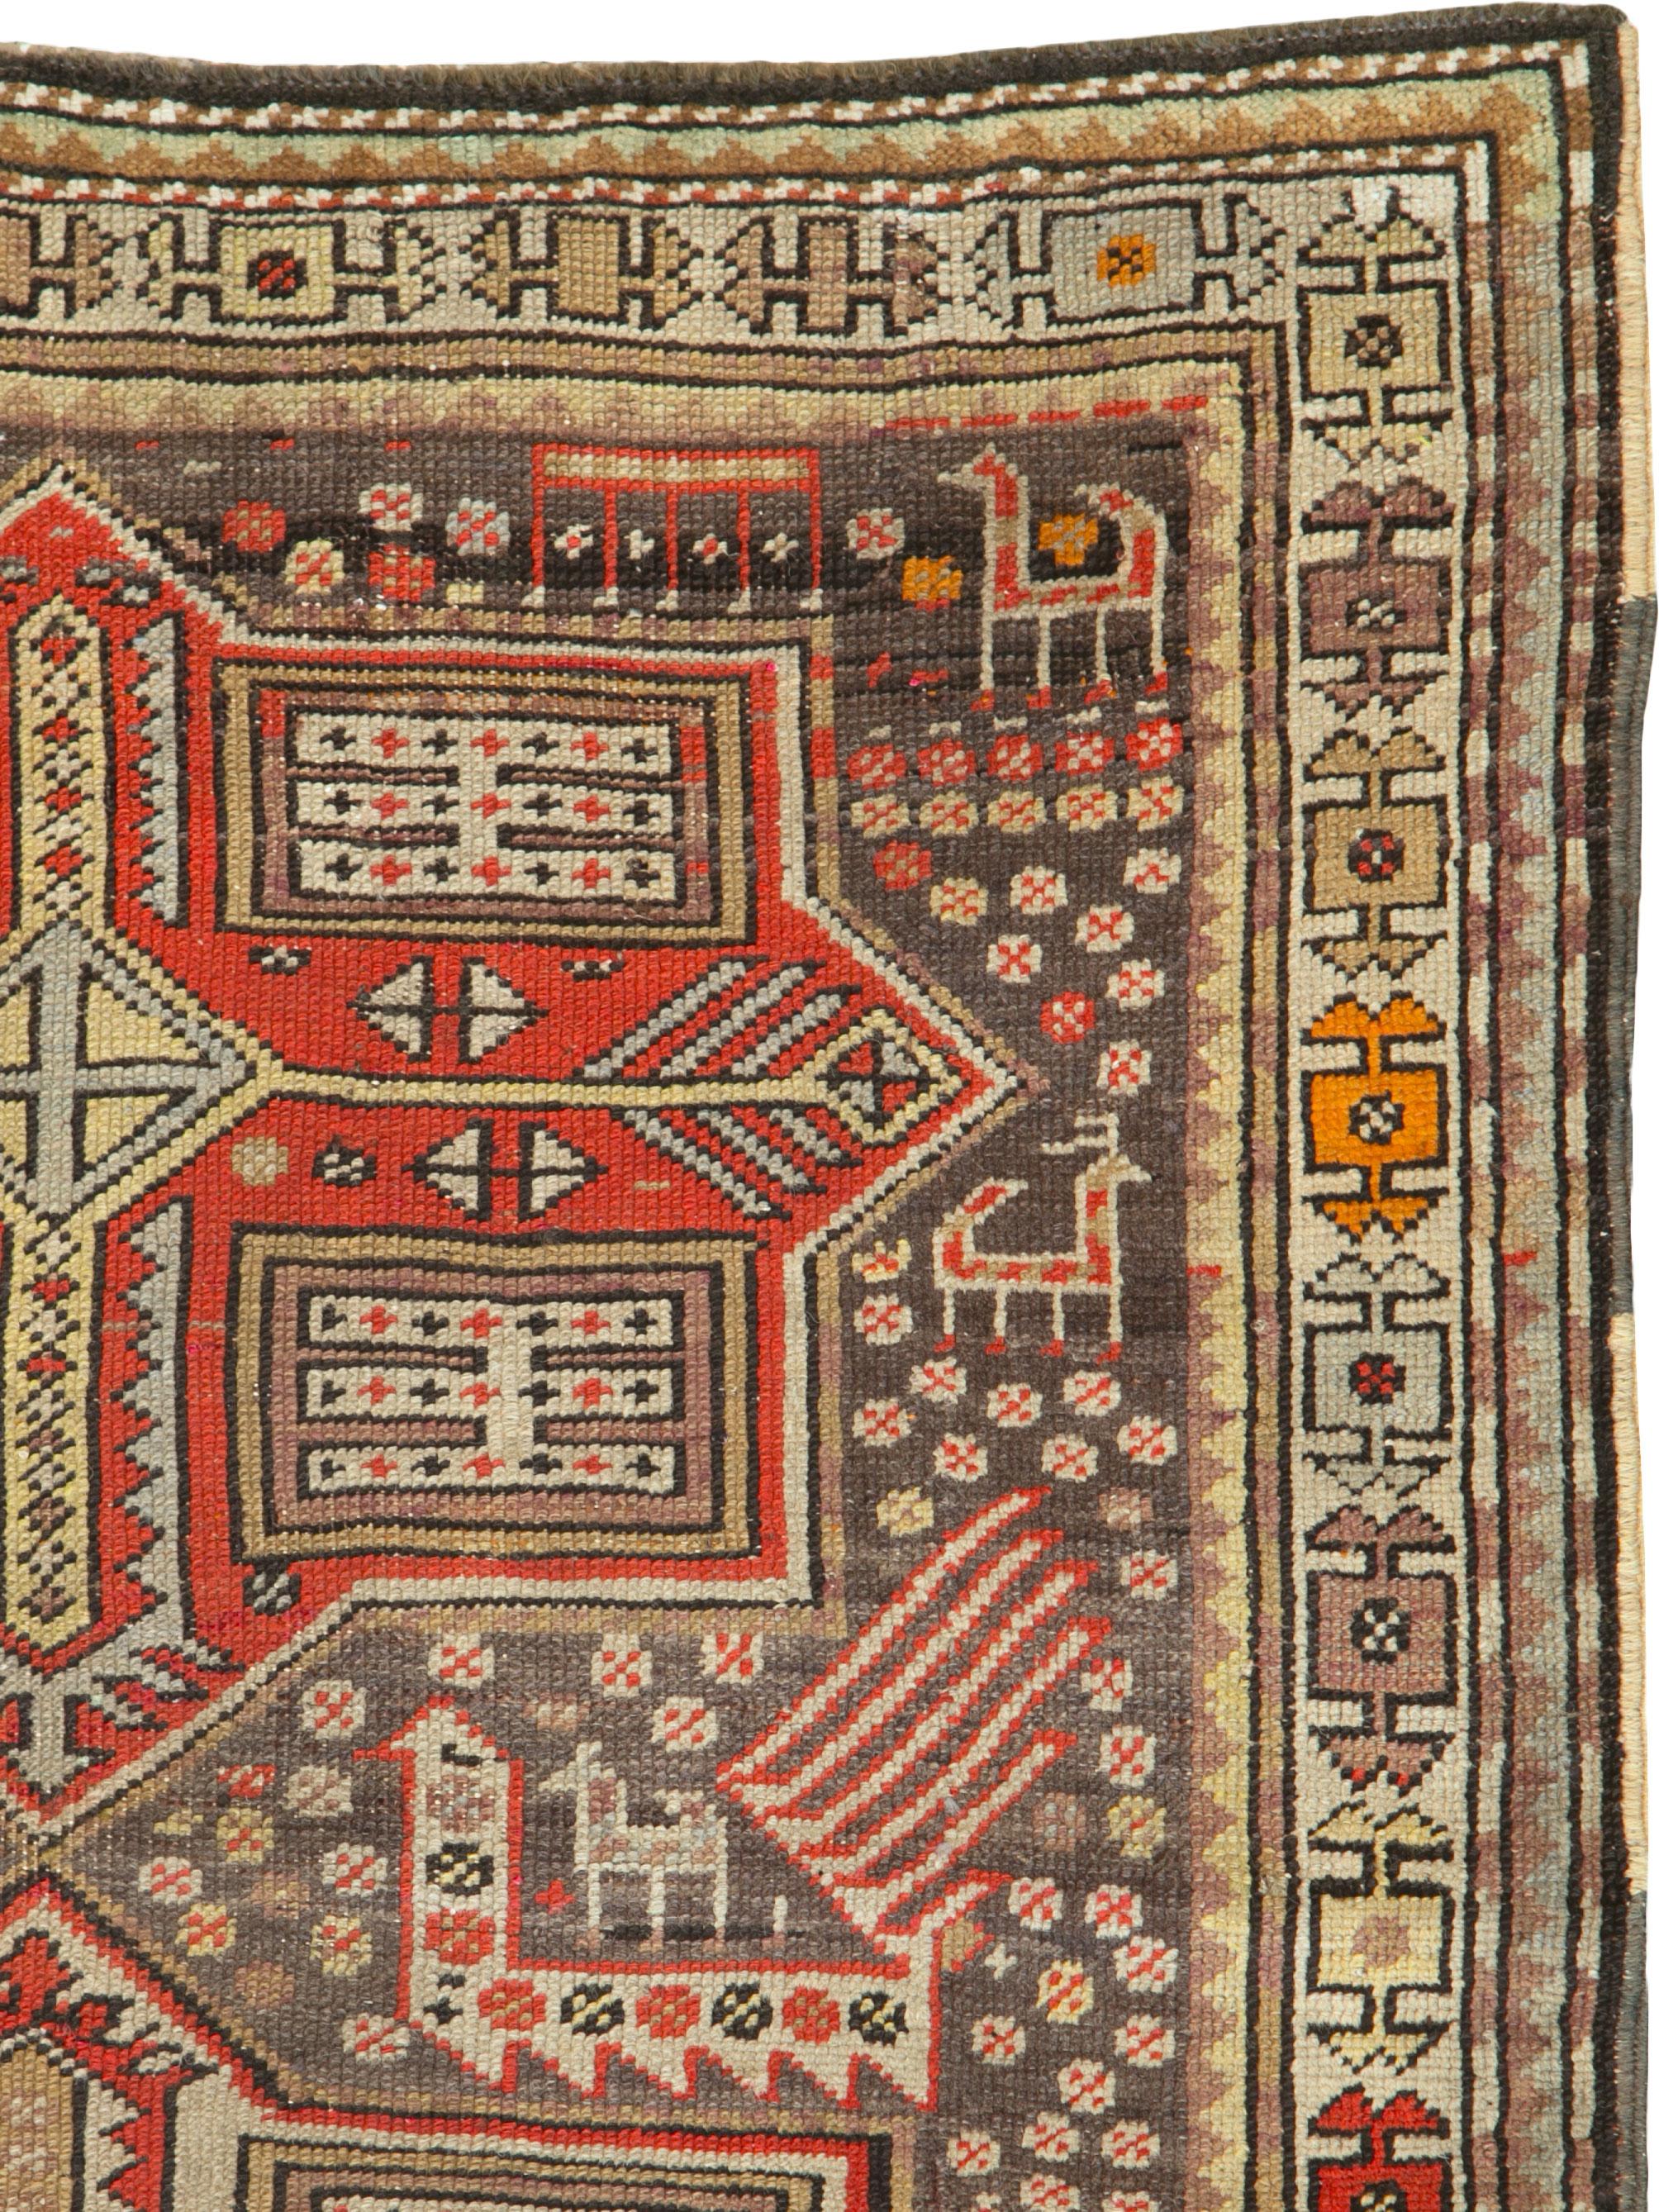 An antique Caucasian Kazak rug from the early 20th century. Three eight-point geometric medallions, 2 in red and 1 in ivory, are flanked by stylized peacocks on a grey-brown ground. Lesser animals and tiny formal devices are scattered about. The